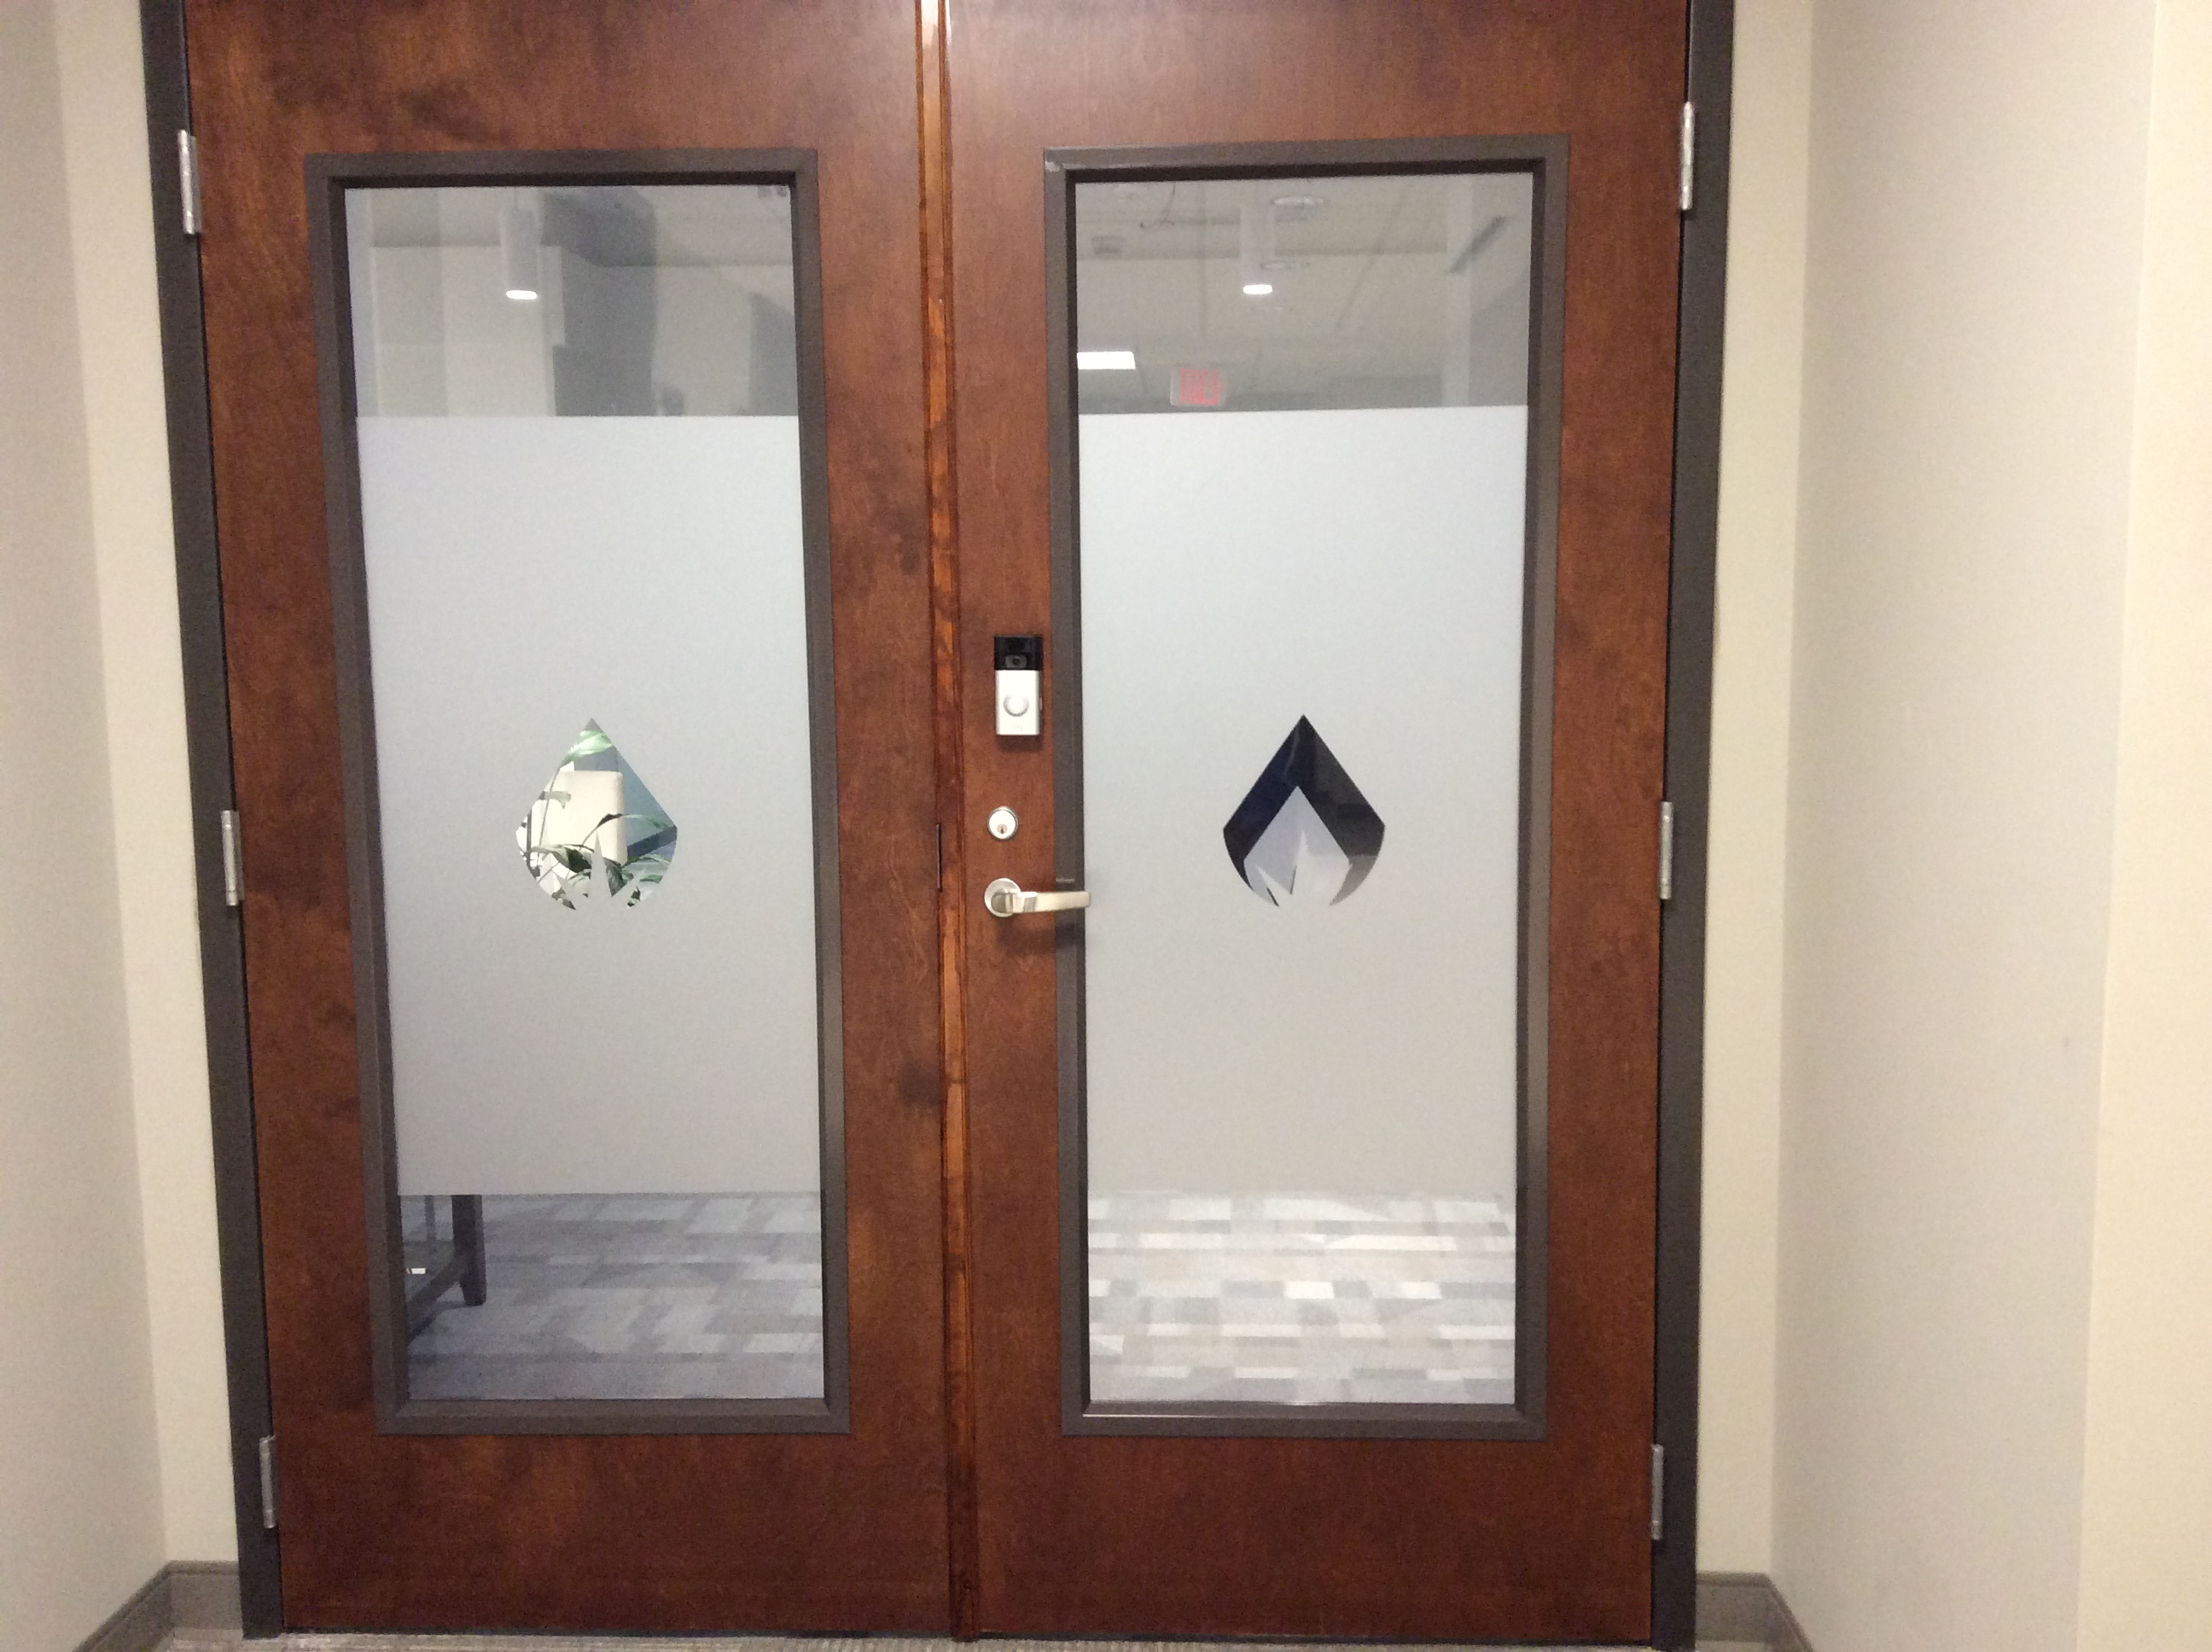 Frosted Vinyl Window Graphics in Raleigh, NC